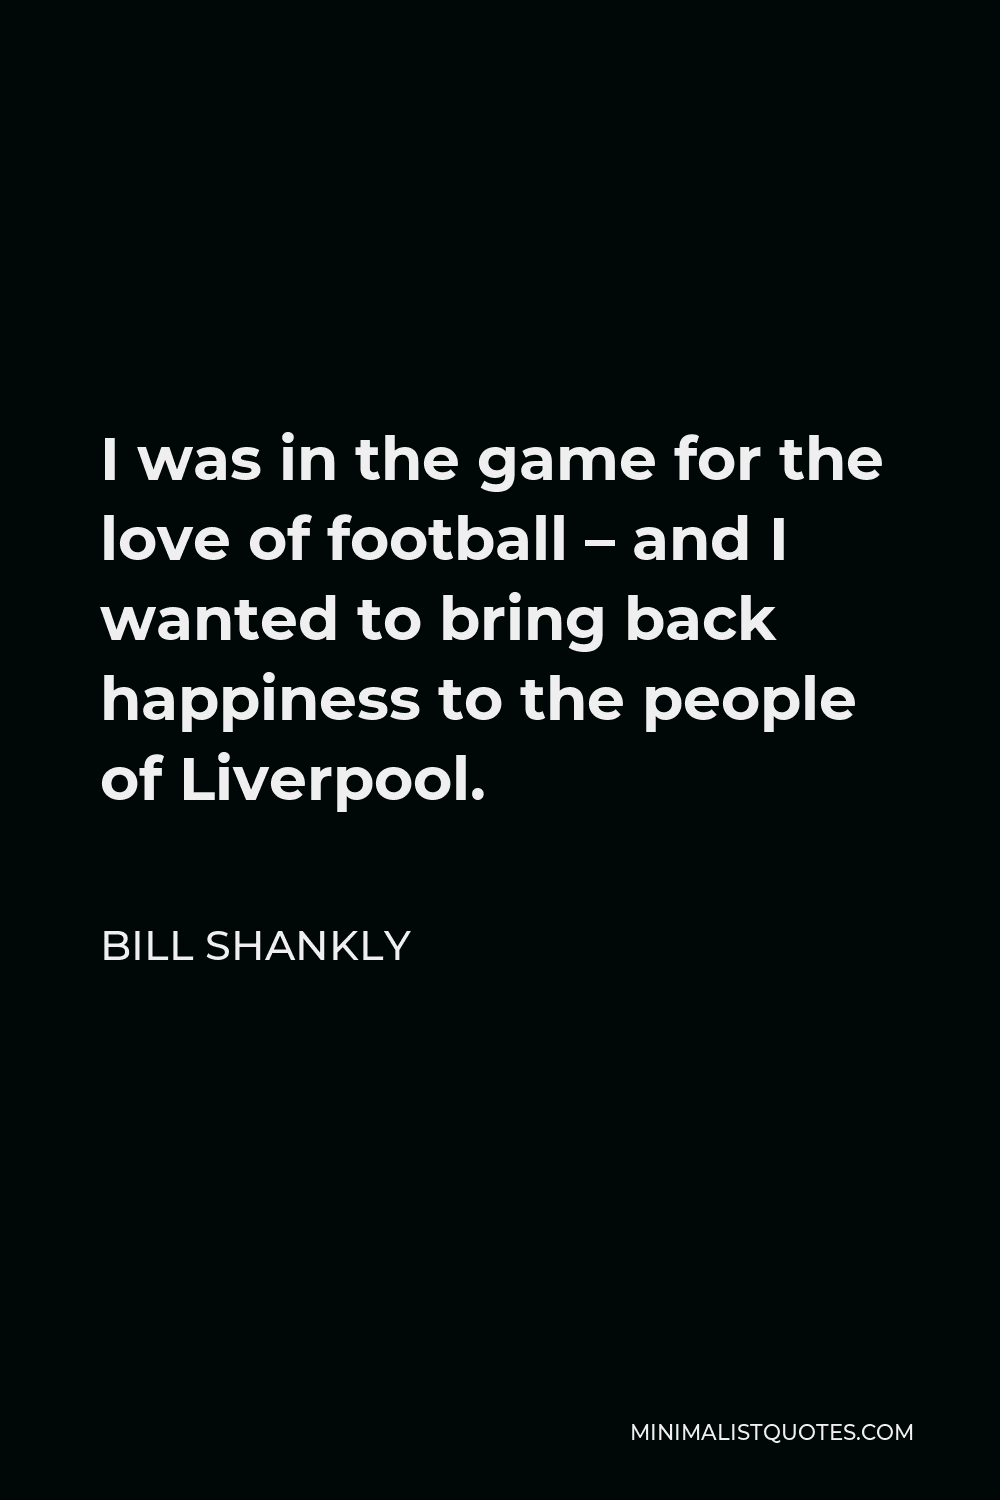 Bill Shankly Quote - I was in the game for the love of football – and I wanted to bring back happiness to the people of Liverpool.